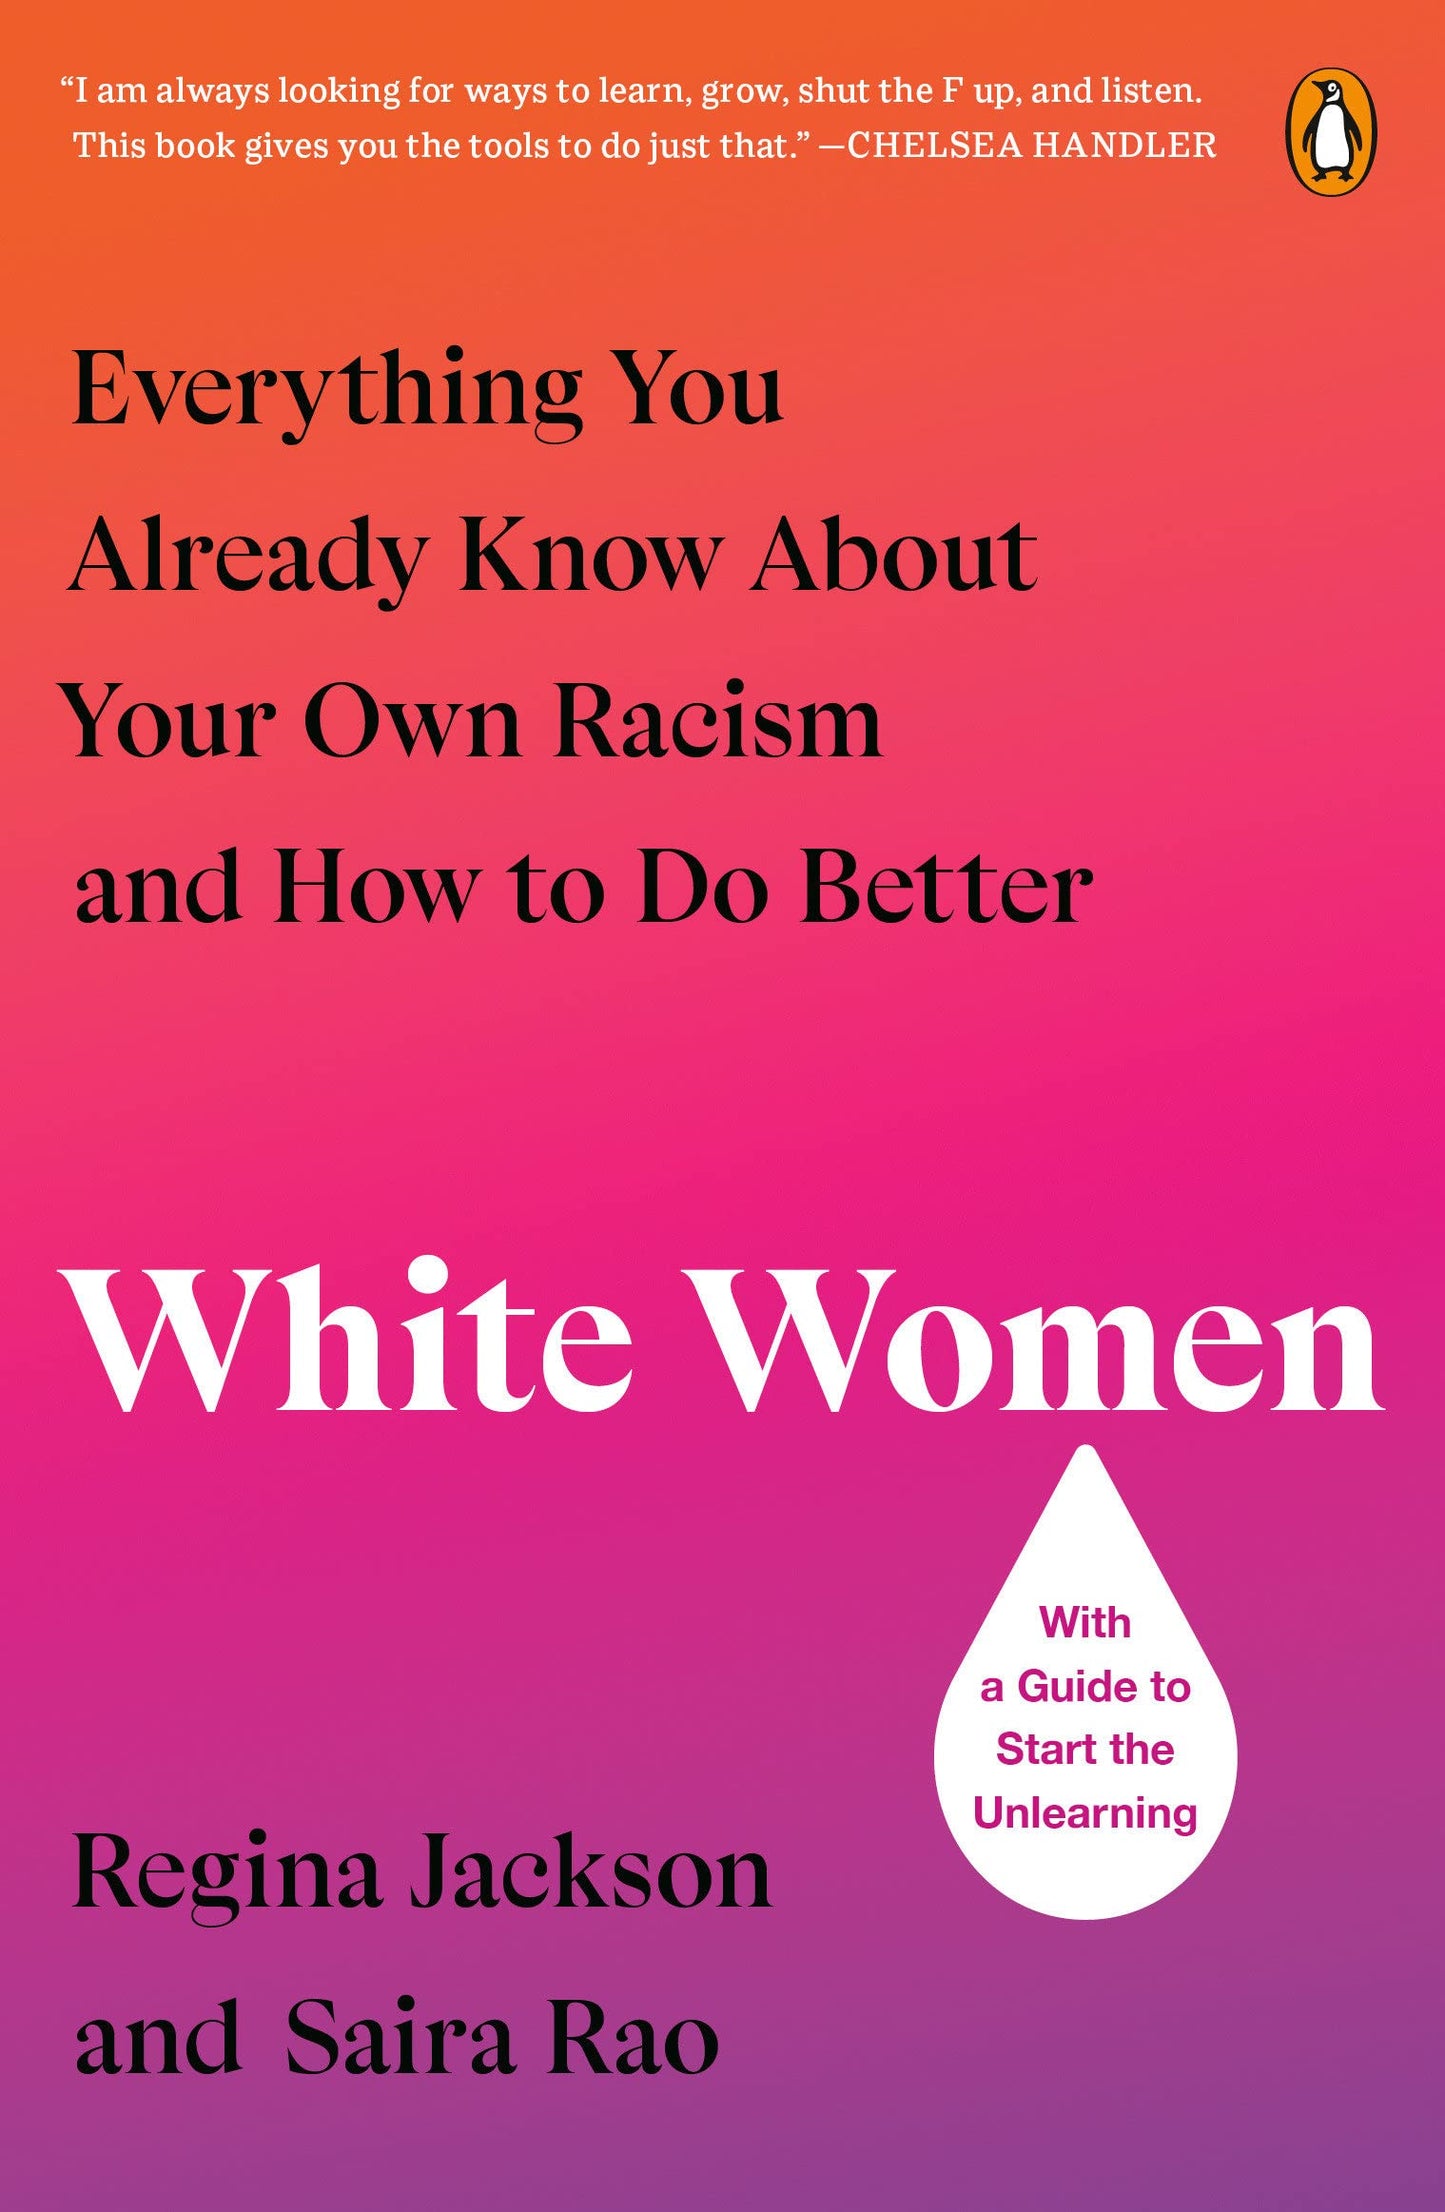 White Women // Everything You Already Know about Your Own Racism and How to Do Better